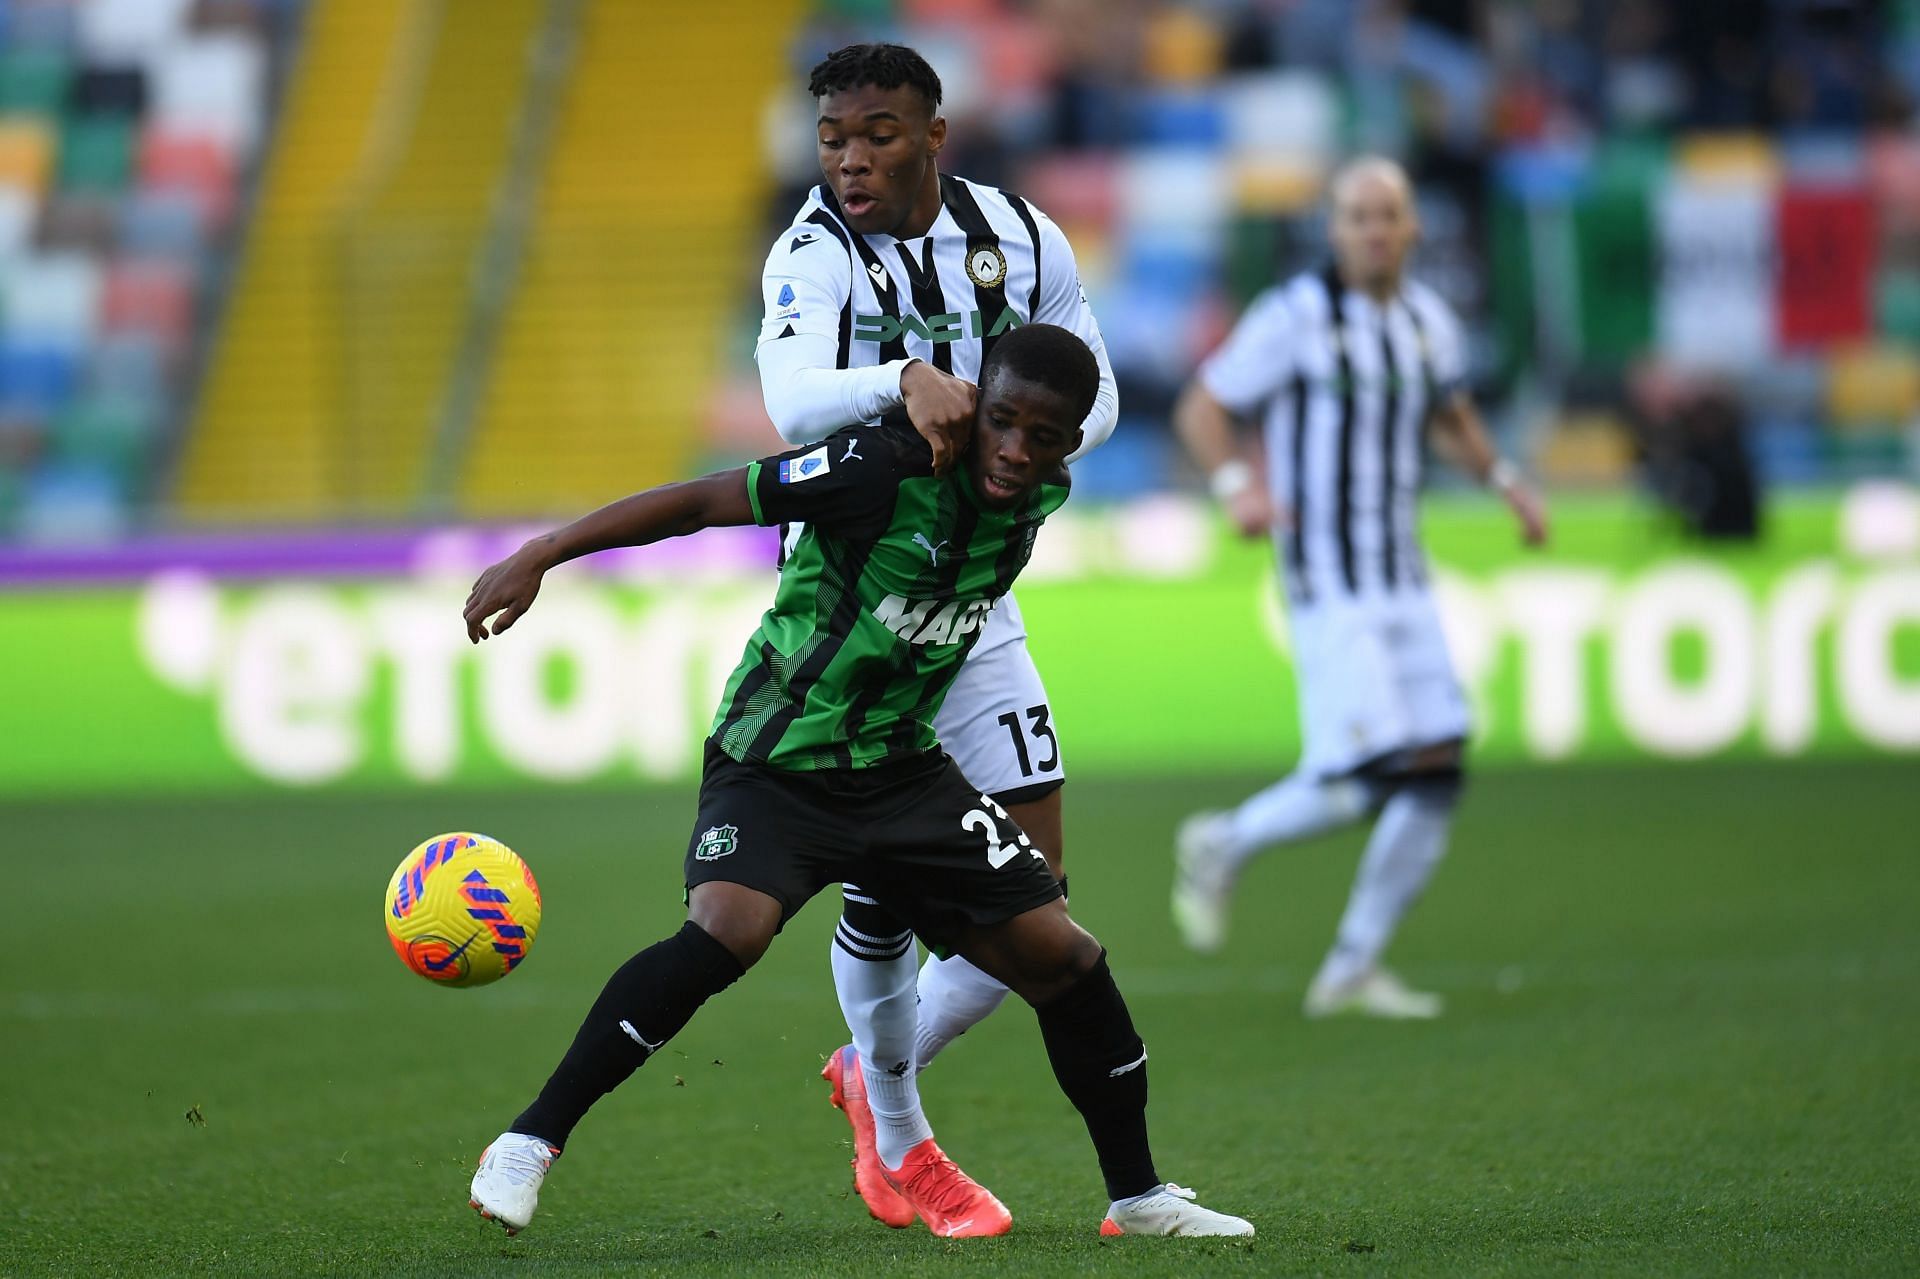 Sassuolo and Udinese lock horns in a Serie A fixture on Saturday